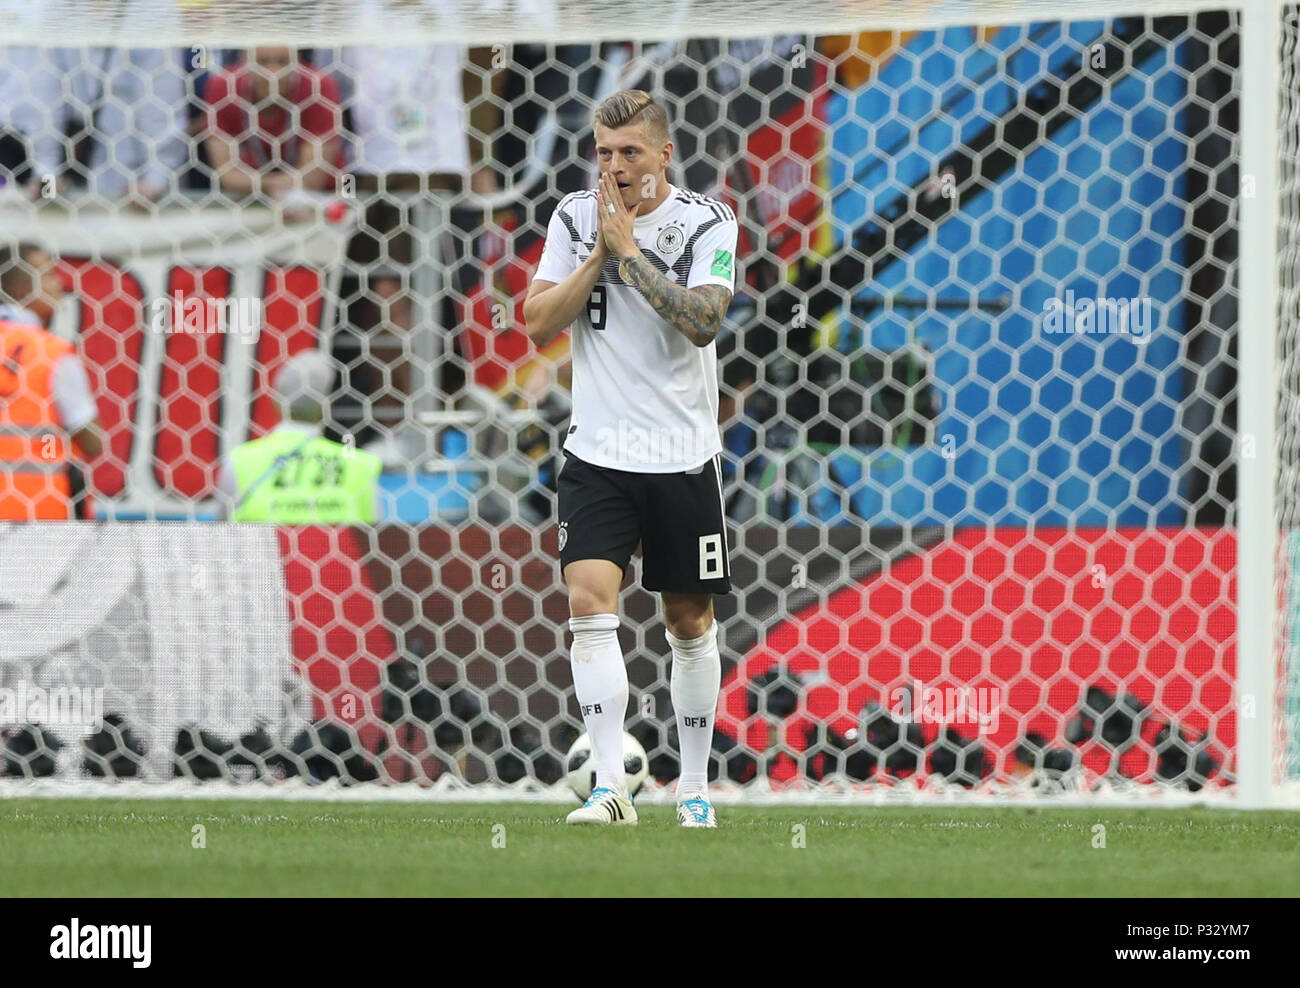 Moscow, Russia. 17th June, 2018. Toni Kroos of Germany reacts during a group F match between Germany and Mexico at the 2018 FIFA World Cup in Moscow, Russia, June 17, 2018. Credit: Xu Zijian/Xinhua/Alamy Live News Stock Photo